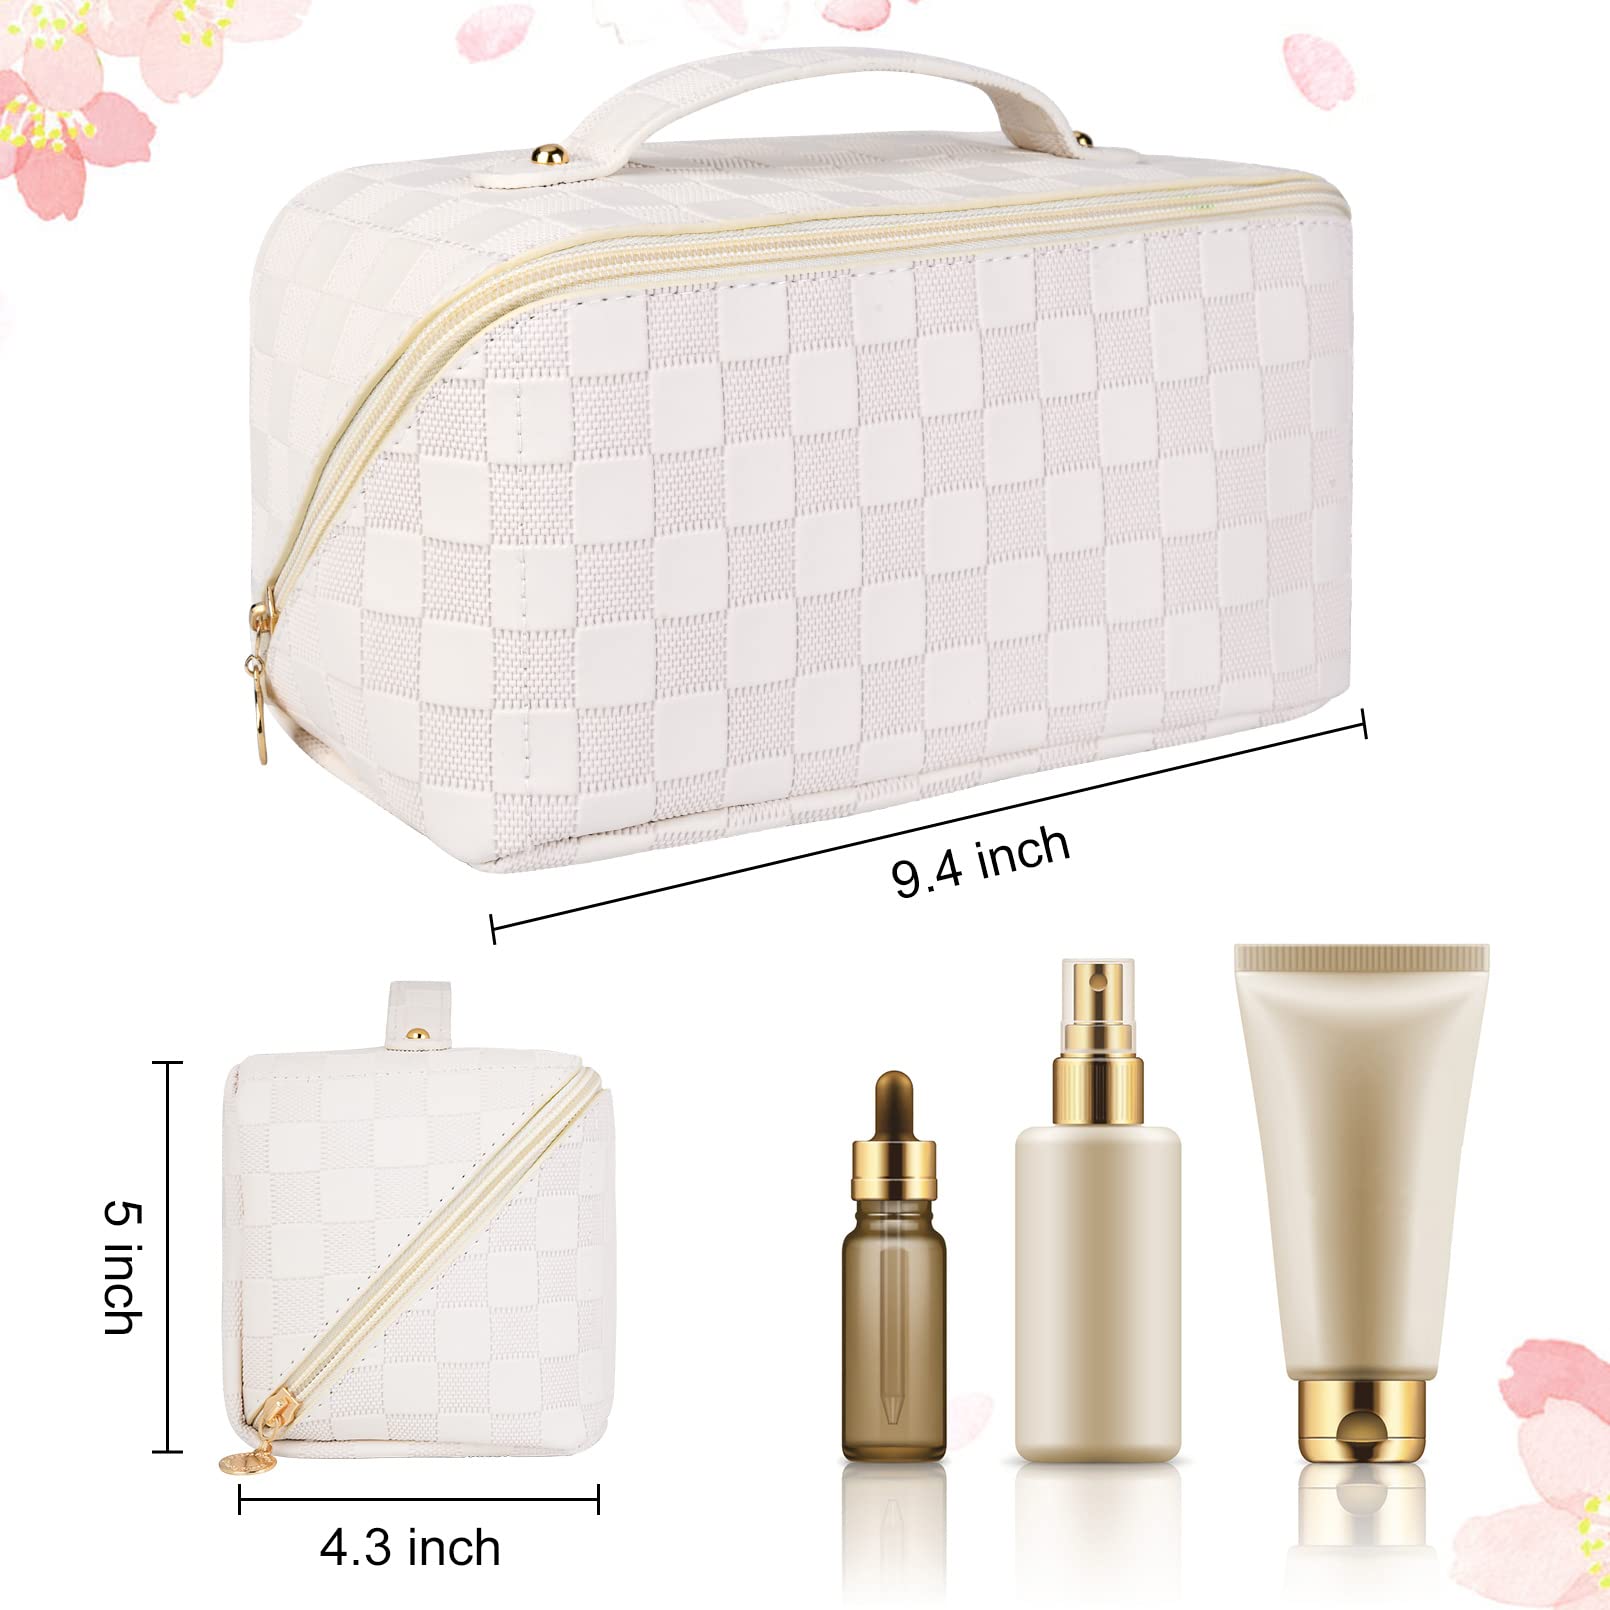 Travel Makeup Bag for Women Large Capacity Cosmetic Bag Waterproof White Checkered Portable PU Leather Toiletry Bag Organizer Makeup Brushes Storage Bag with Dividers and Handle